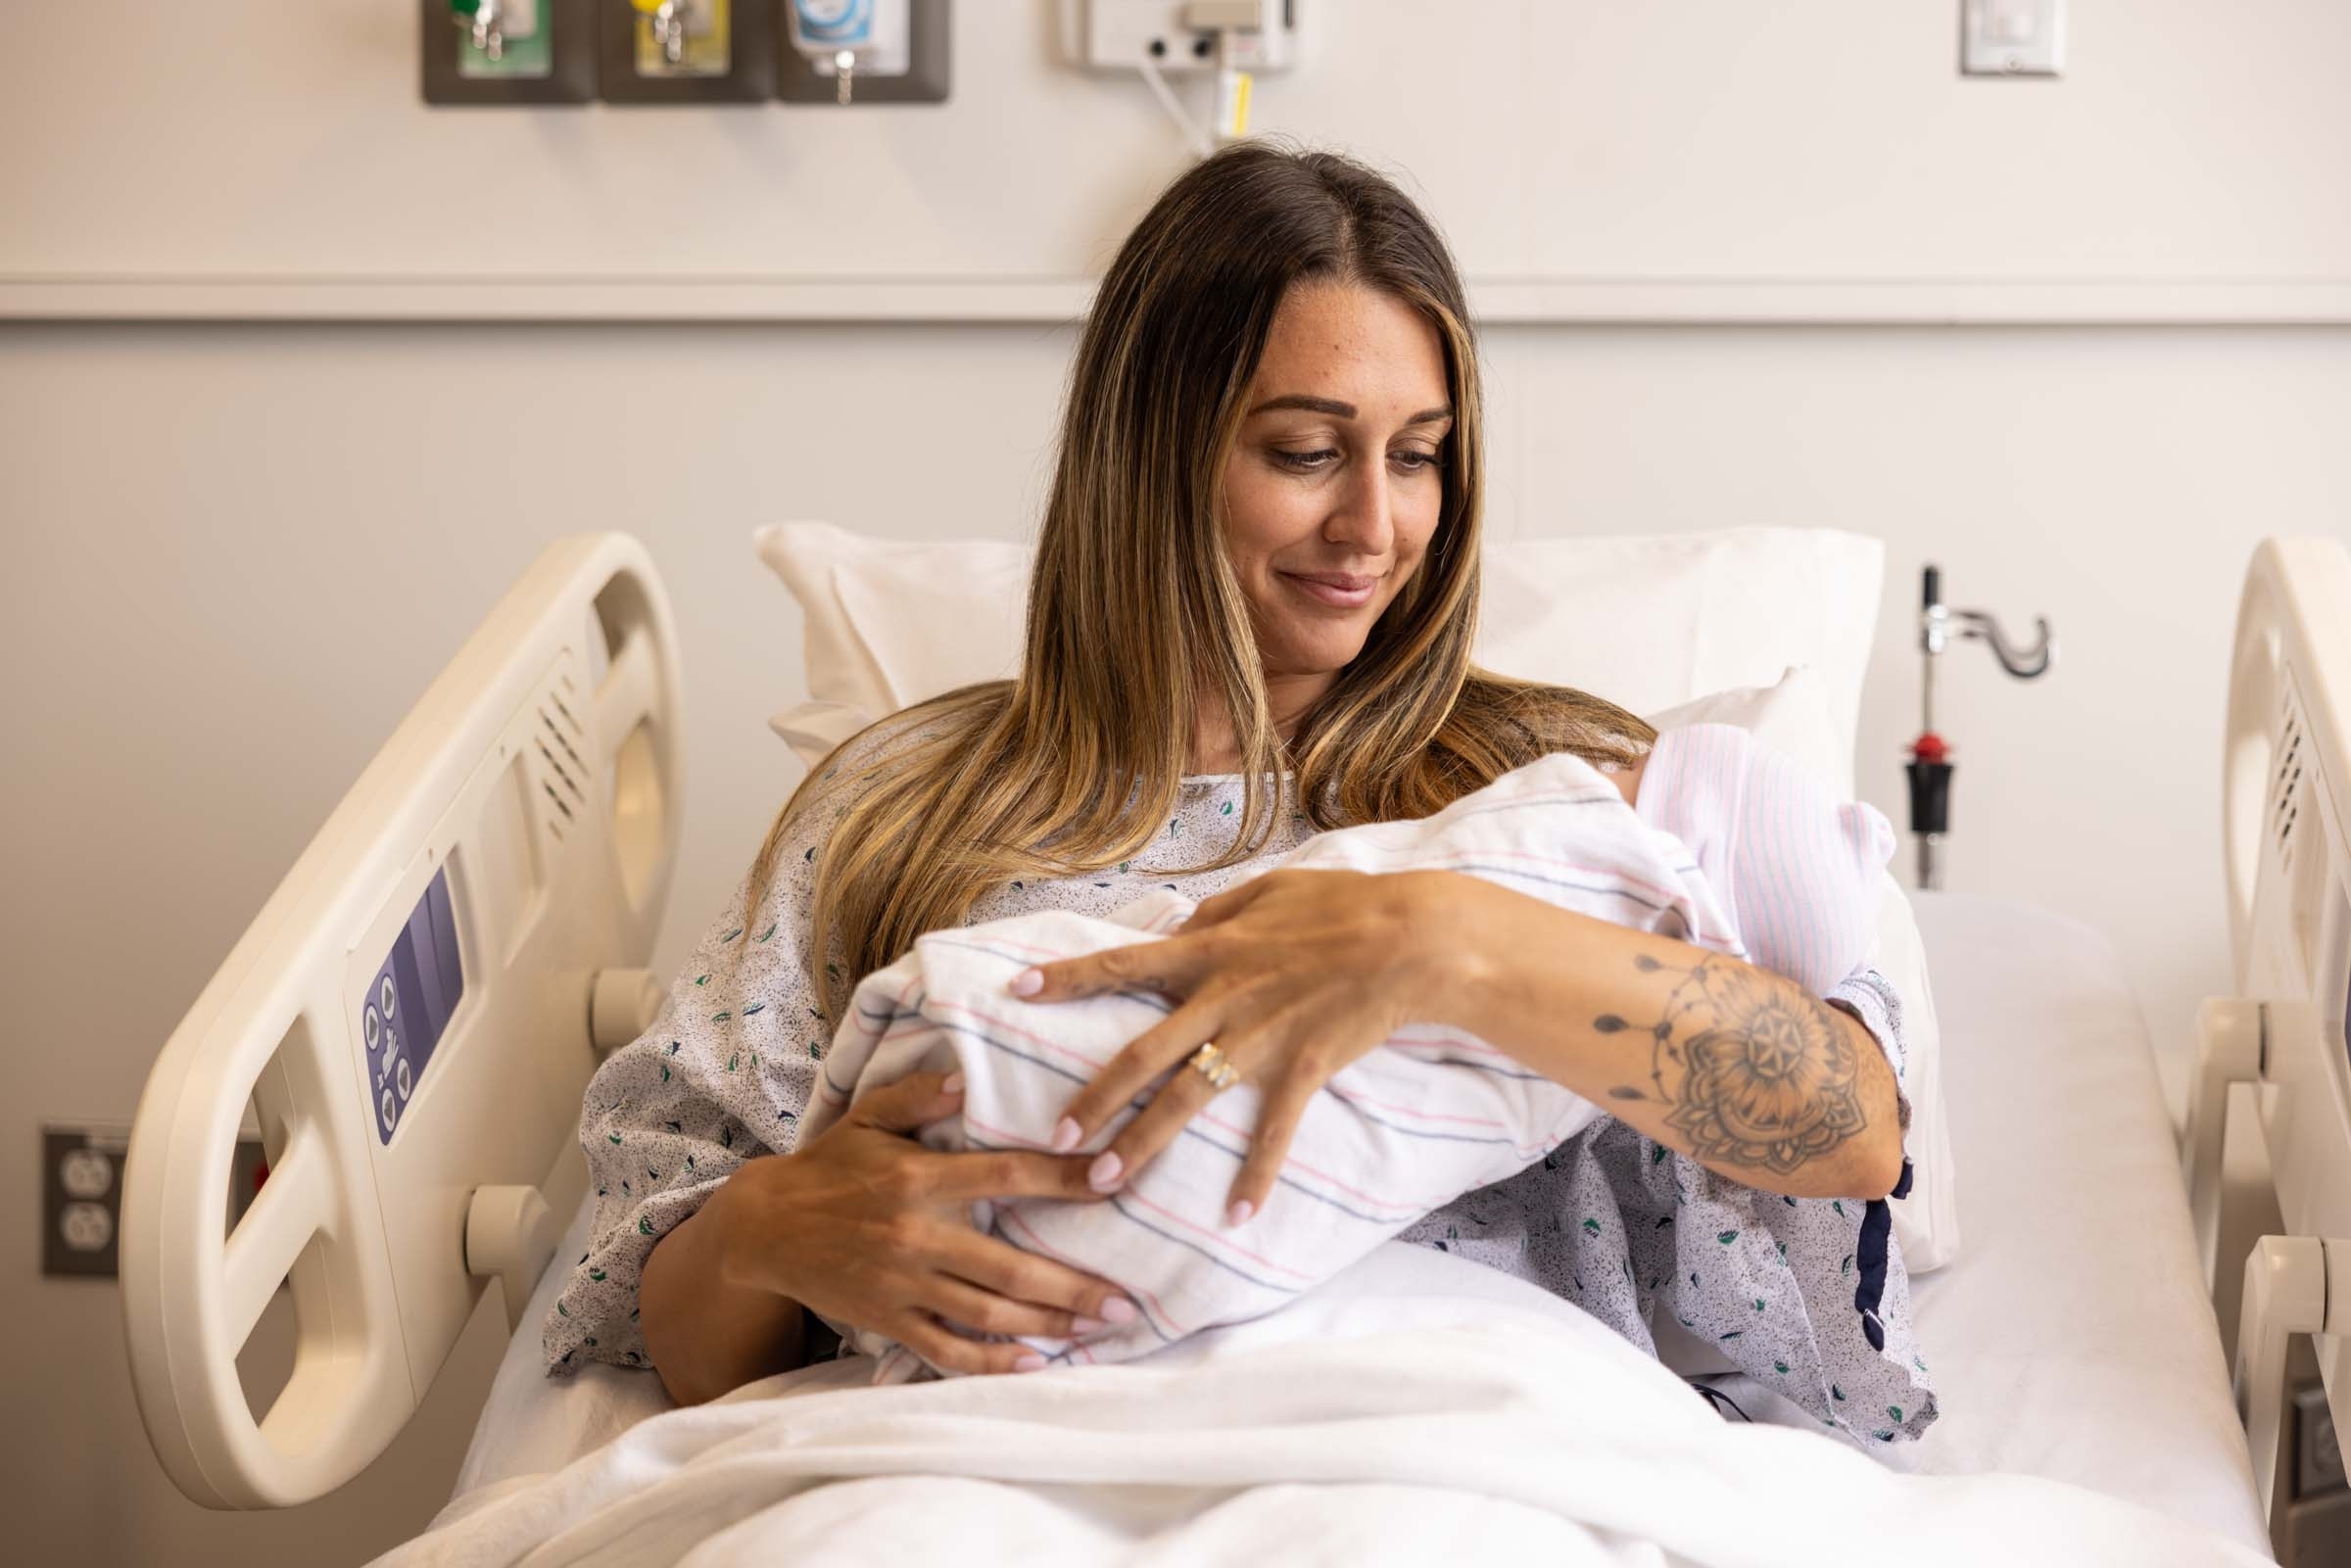 5 Ways To Have a More Positive Birth Experience